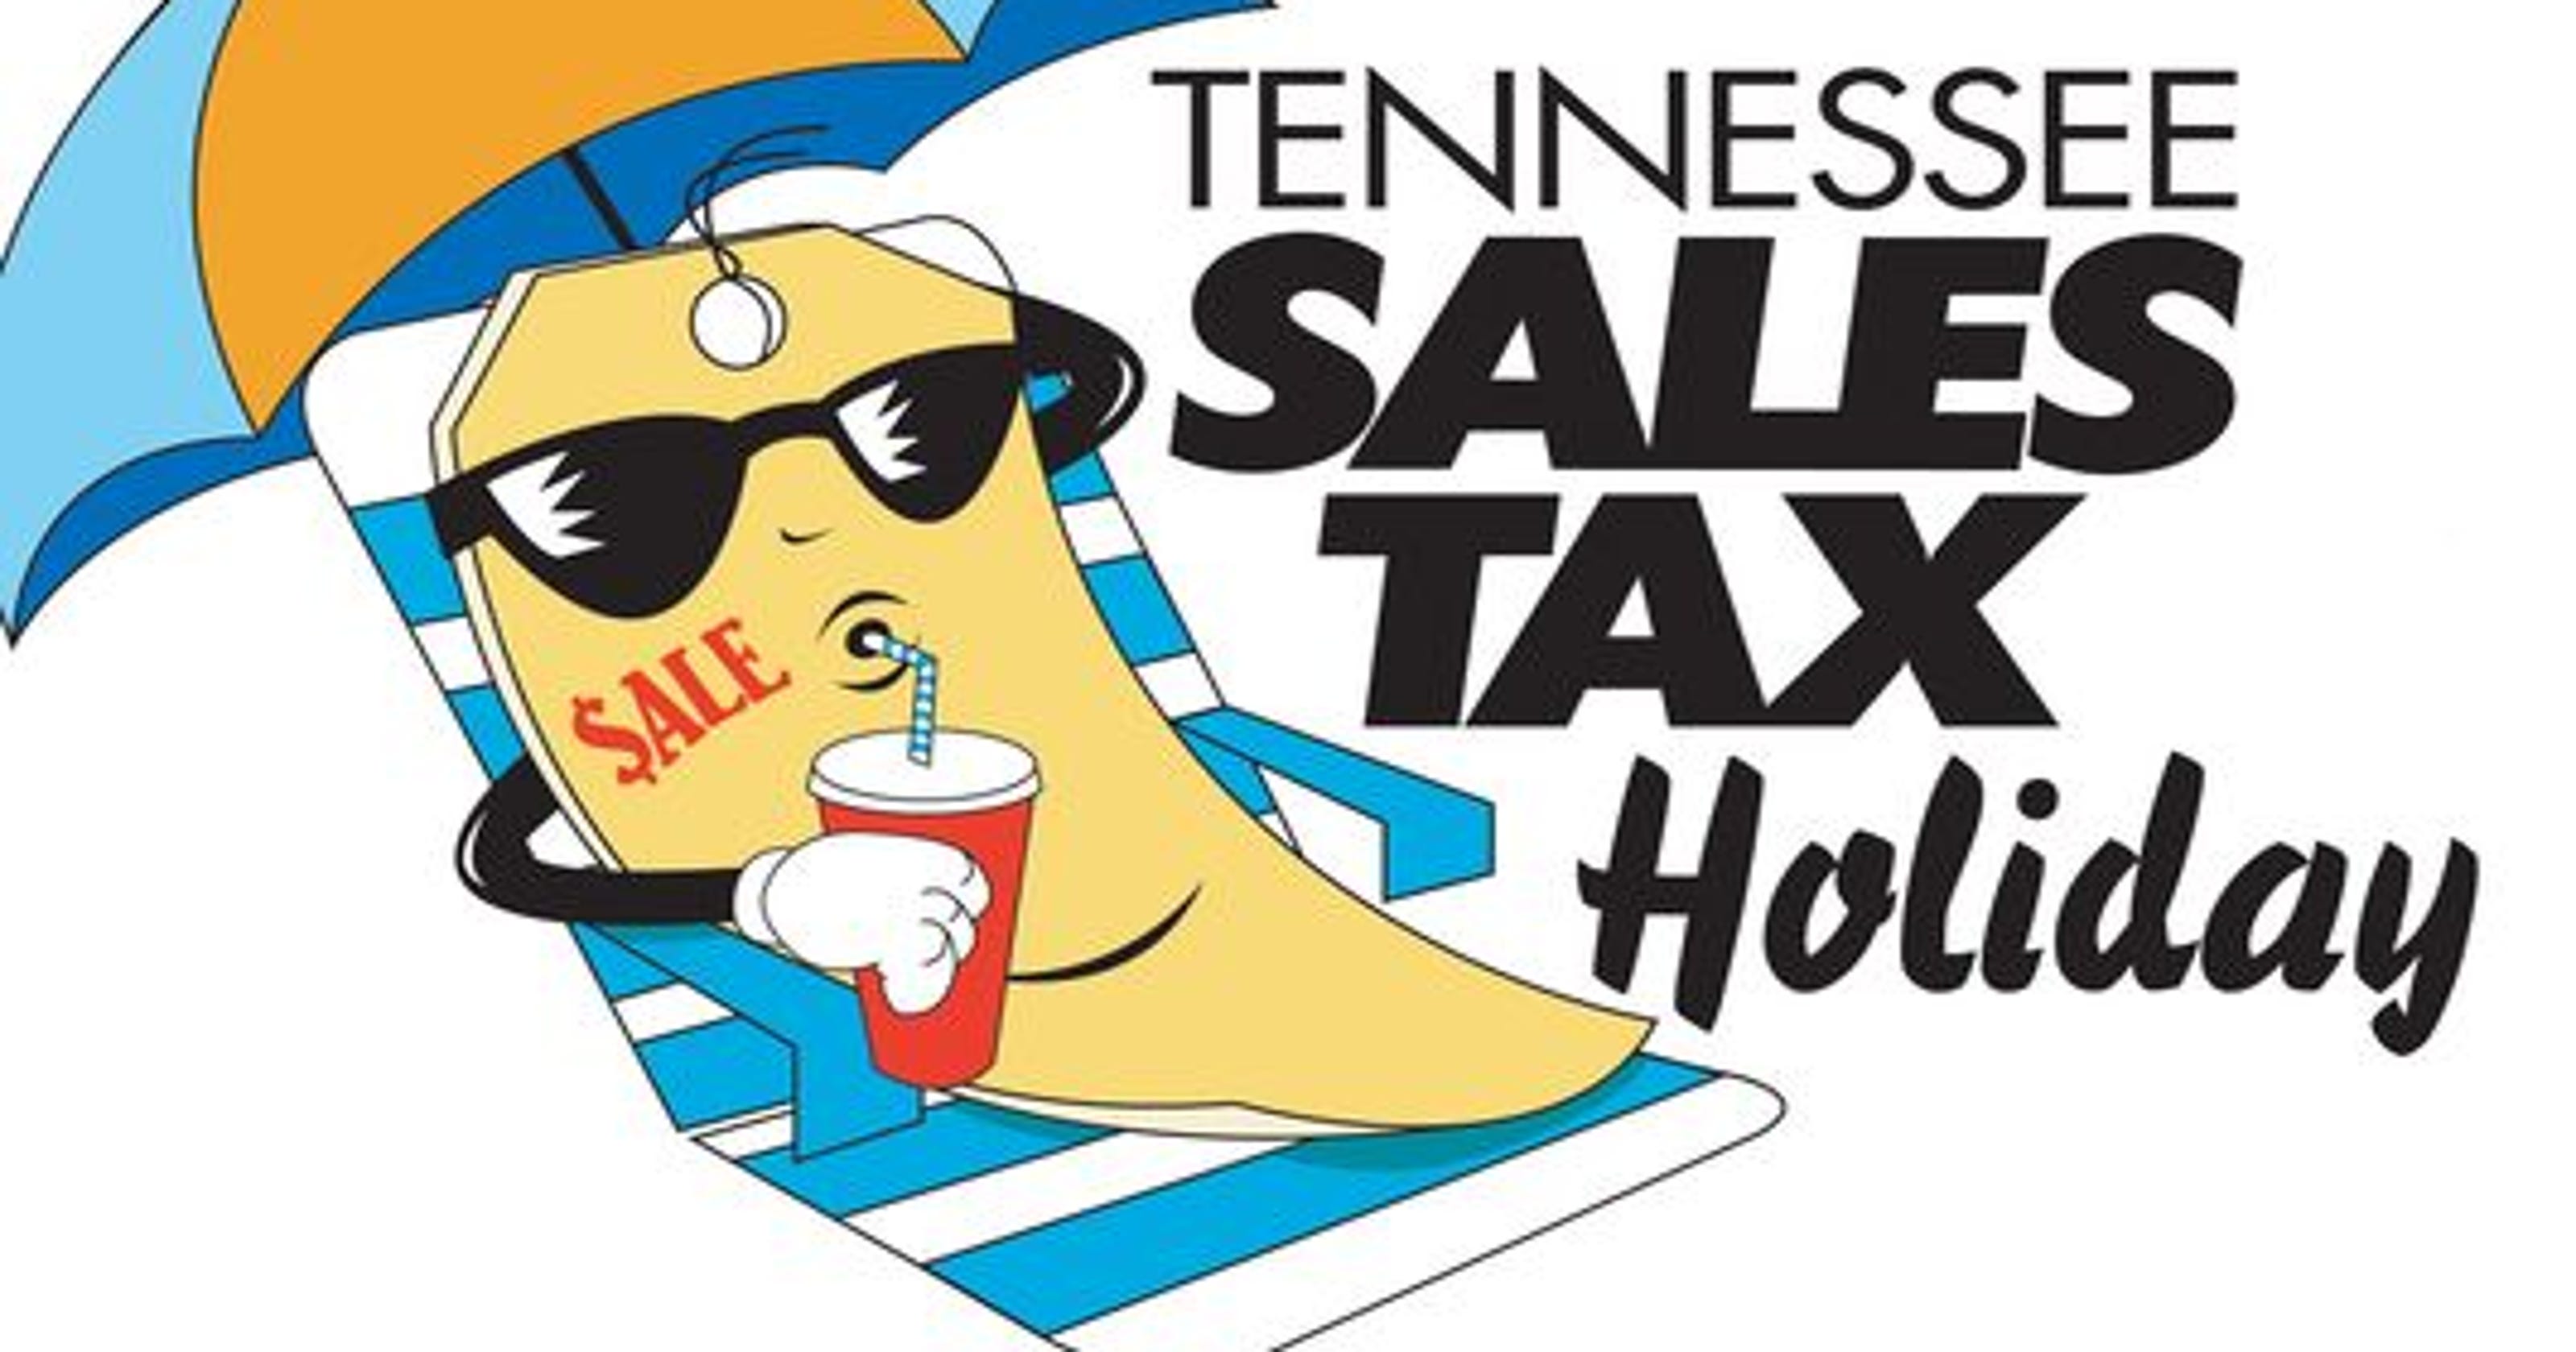 Tennessee sales tax holiday: What you need to know